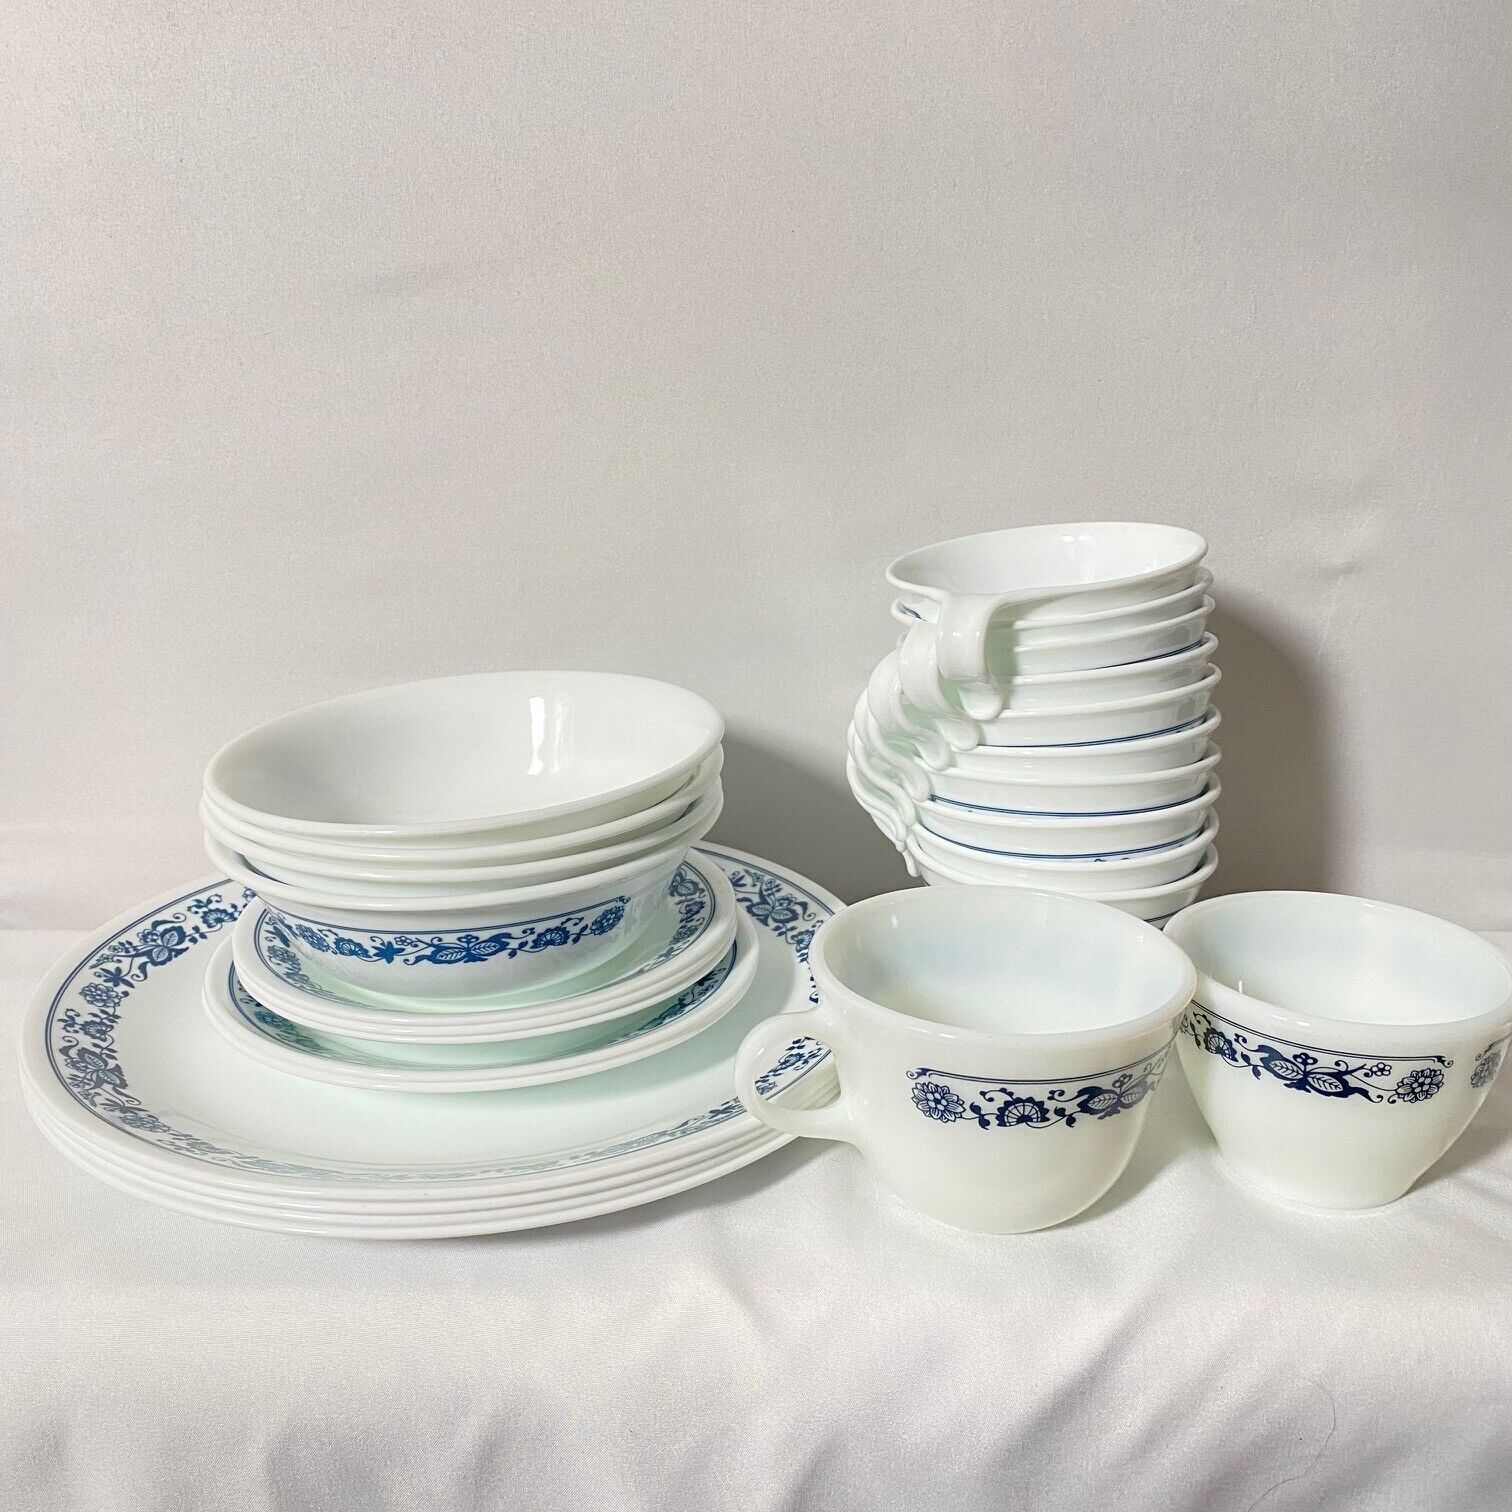 Vintage Corelle Old Town Blue ( Blue Onion ) Dinnerware - by the piece